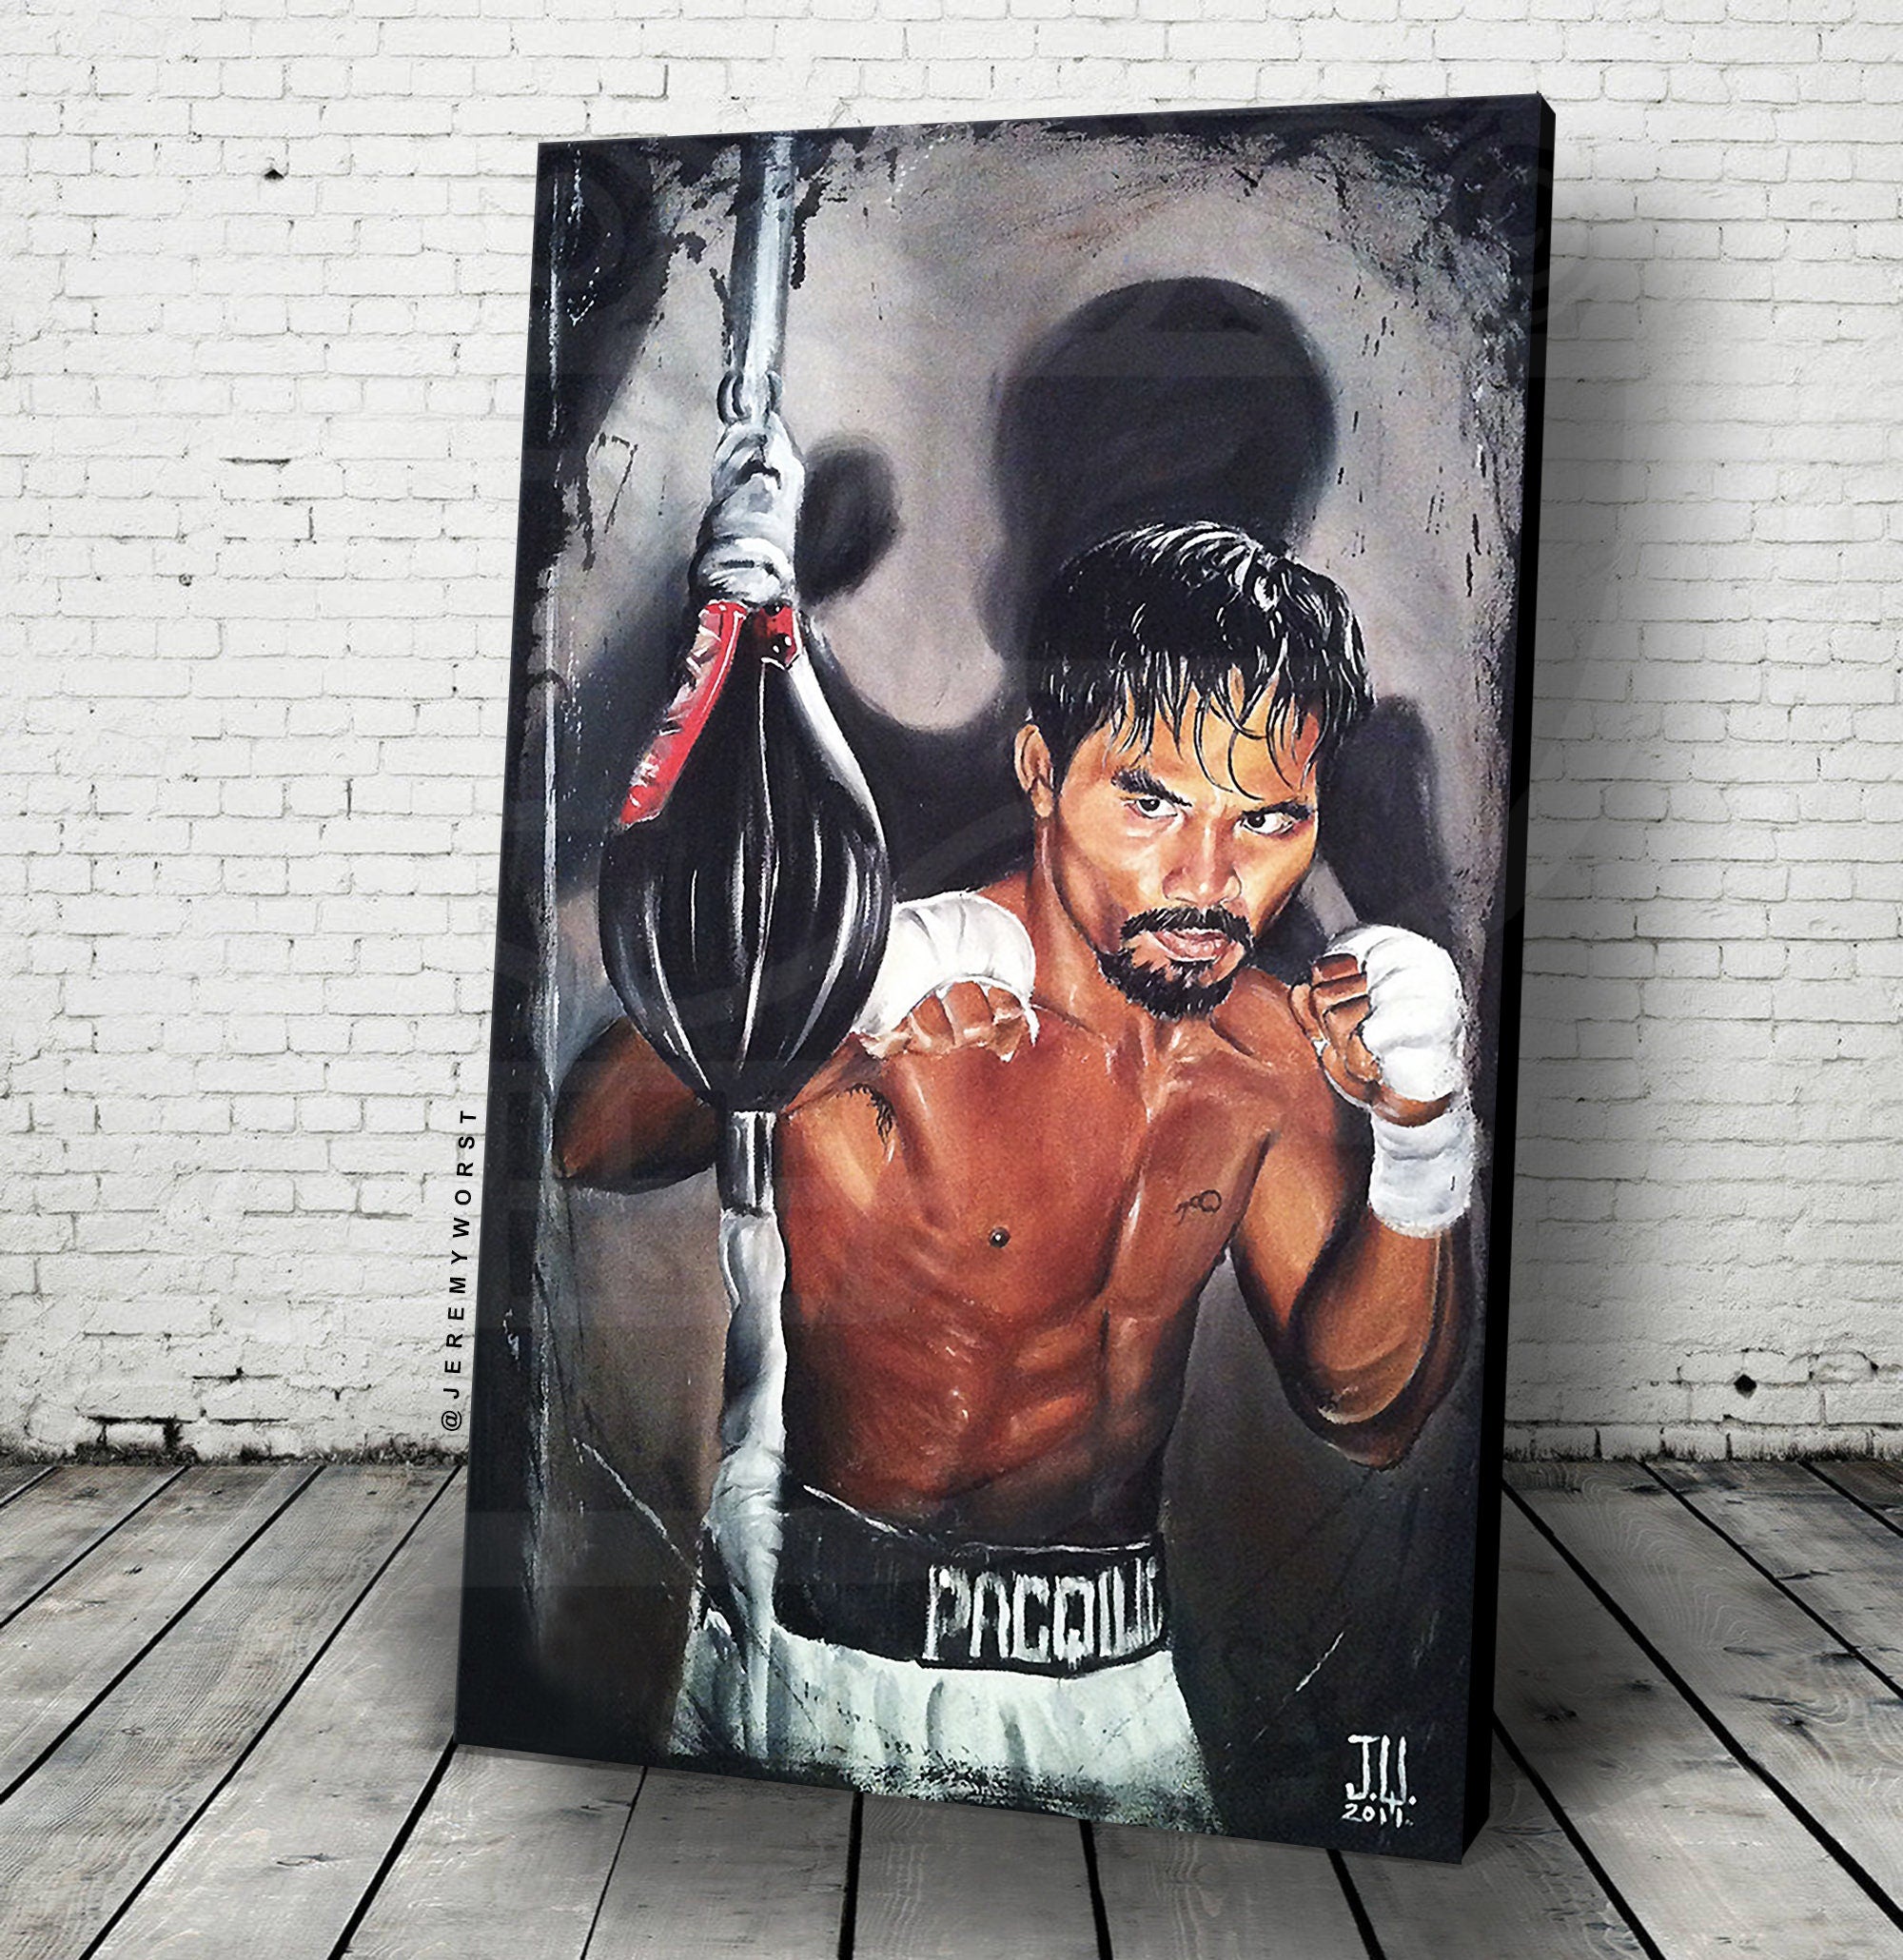 Bobby Pacquiao Manny Pacquiao Anime Posters Wall Art Room Decor Aesthetic  for Bedroom Wall Decoration for Living Room Home Decor 16x24inch(40x60cm) :  Amazon.co.uk: Home & Kitchen